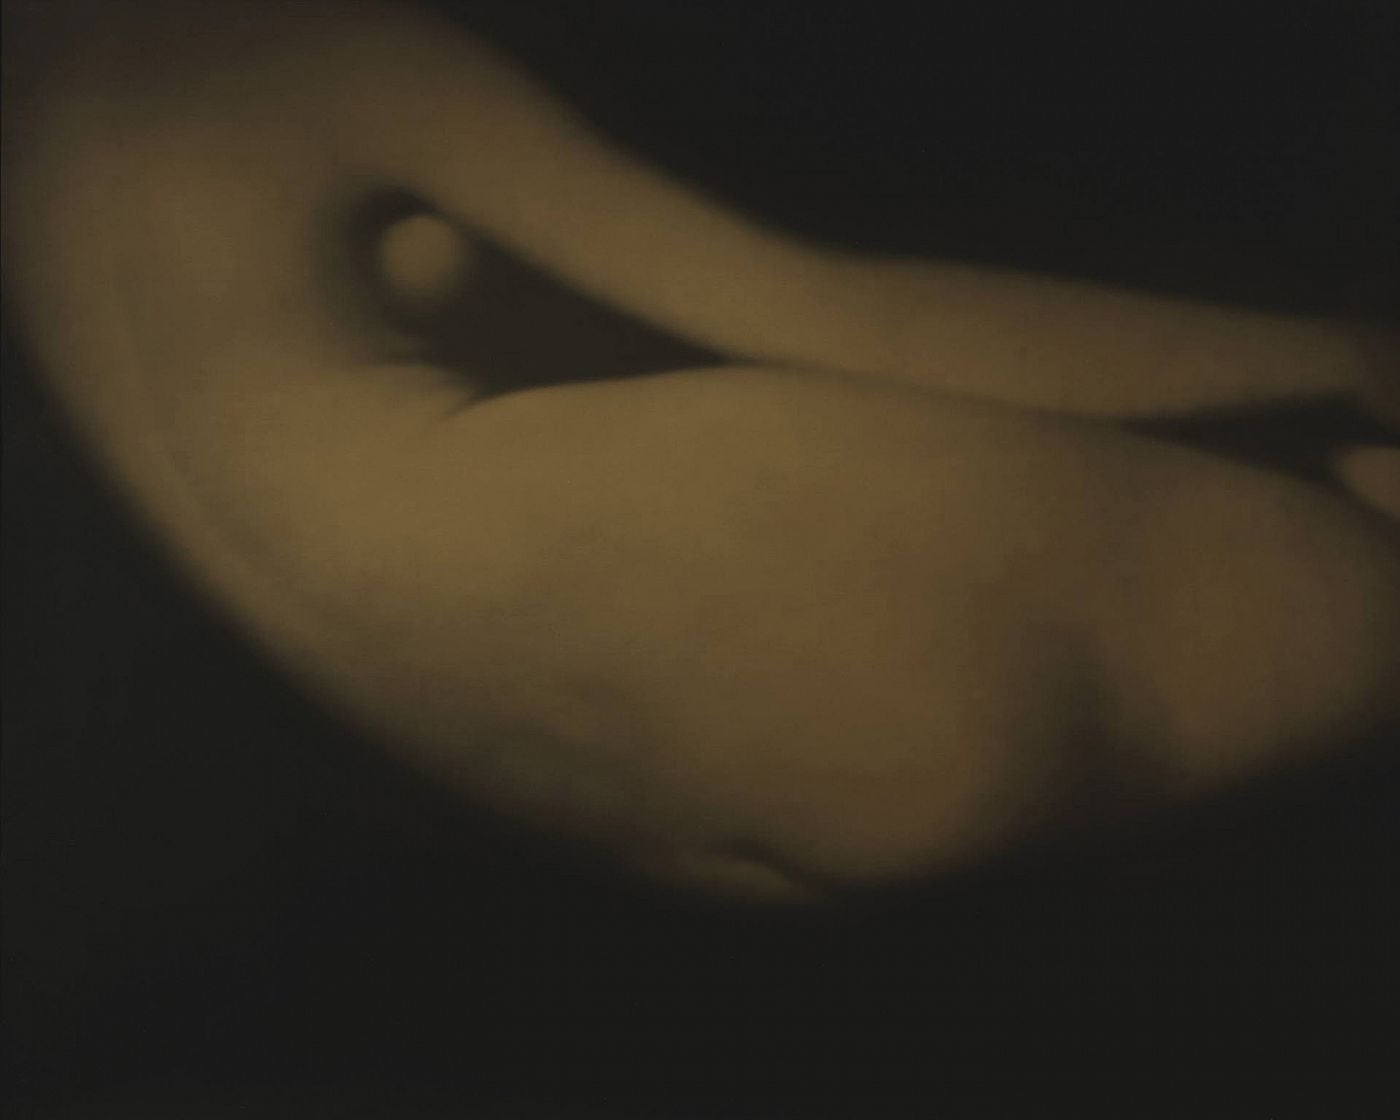 Robert Stivers: Sestina, Limited Edition (with Toned Silver Print, "The Clearing" Variant)